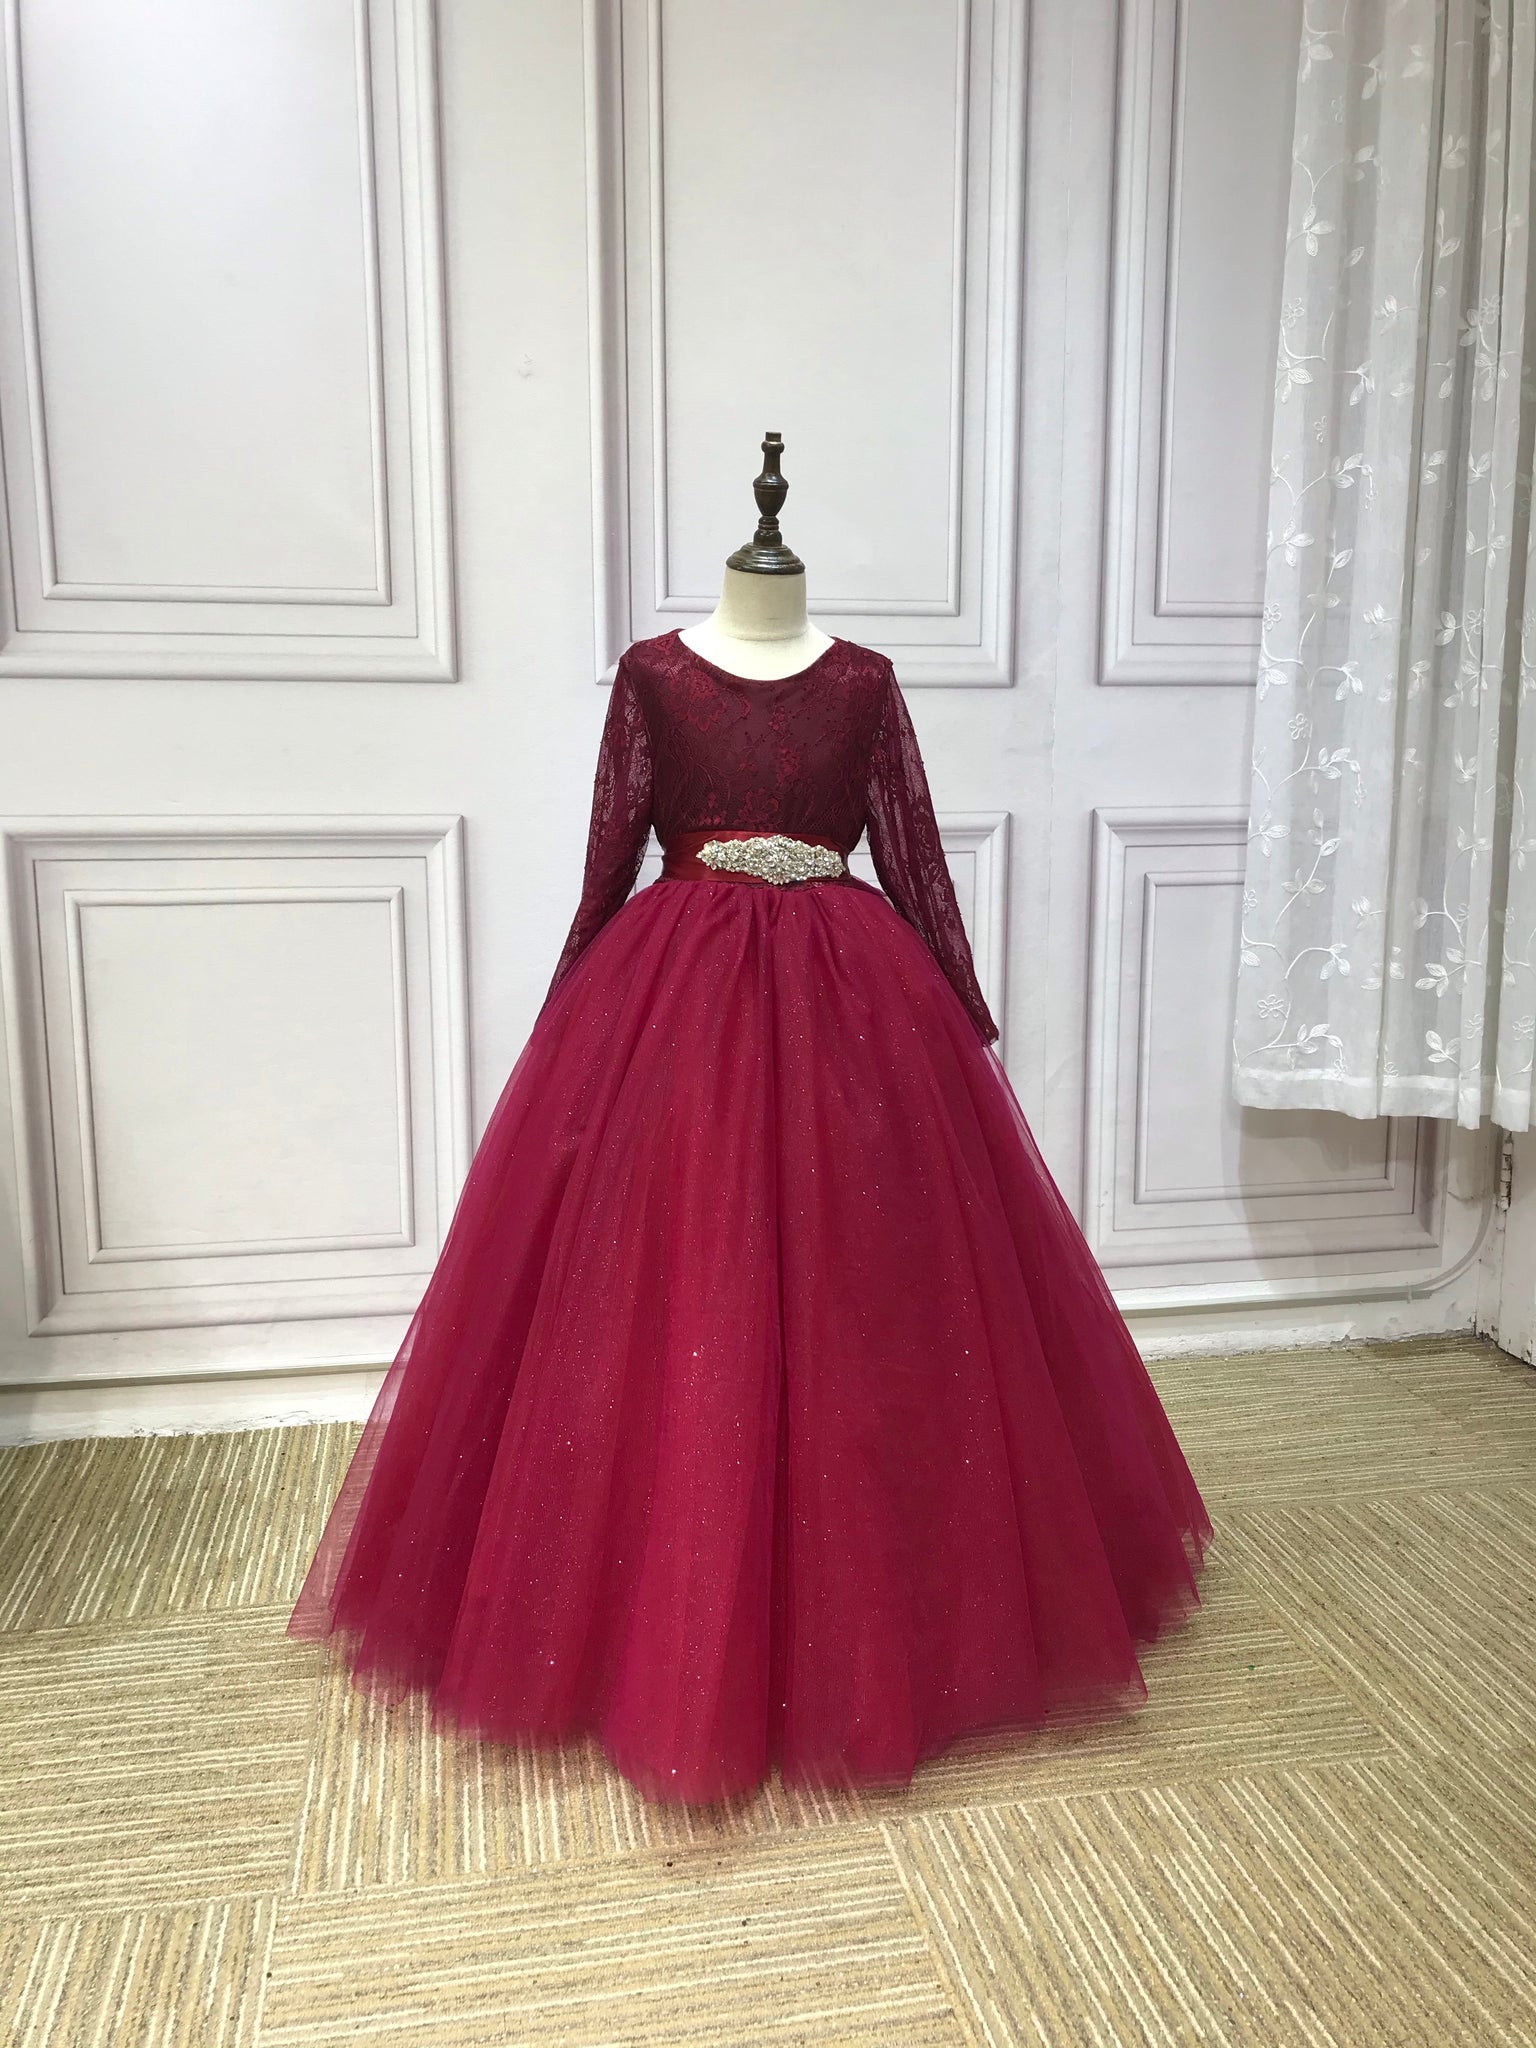 Red Princess Ball Gown Flower Girl Dress For Weddings And Formal Events  2020 Fashionable Satin Pageant Outfit For Kids Vestidos DePrimera From  Manweisi, $70.28 | DHgate.Com